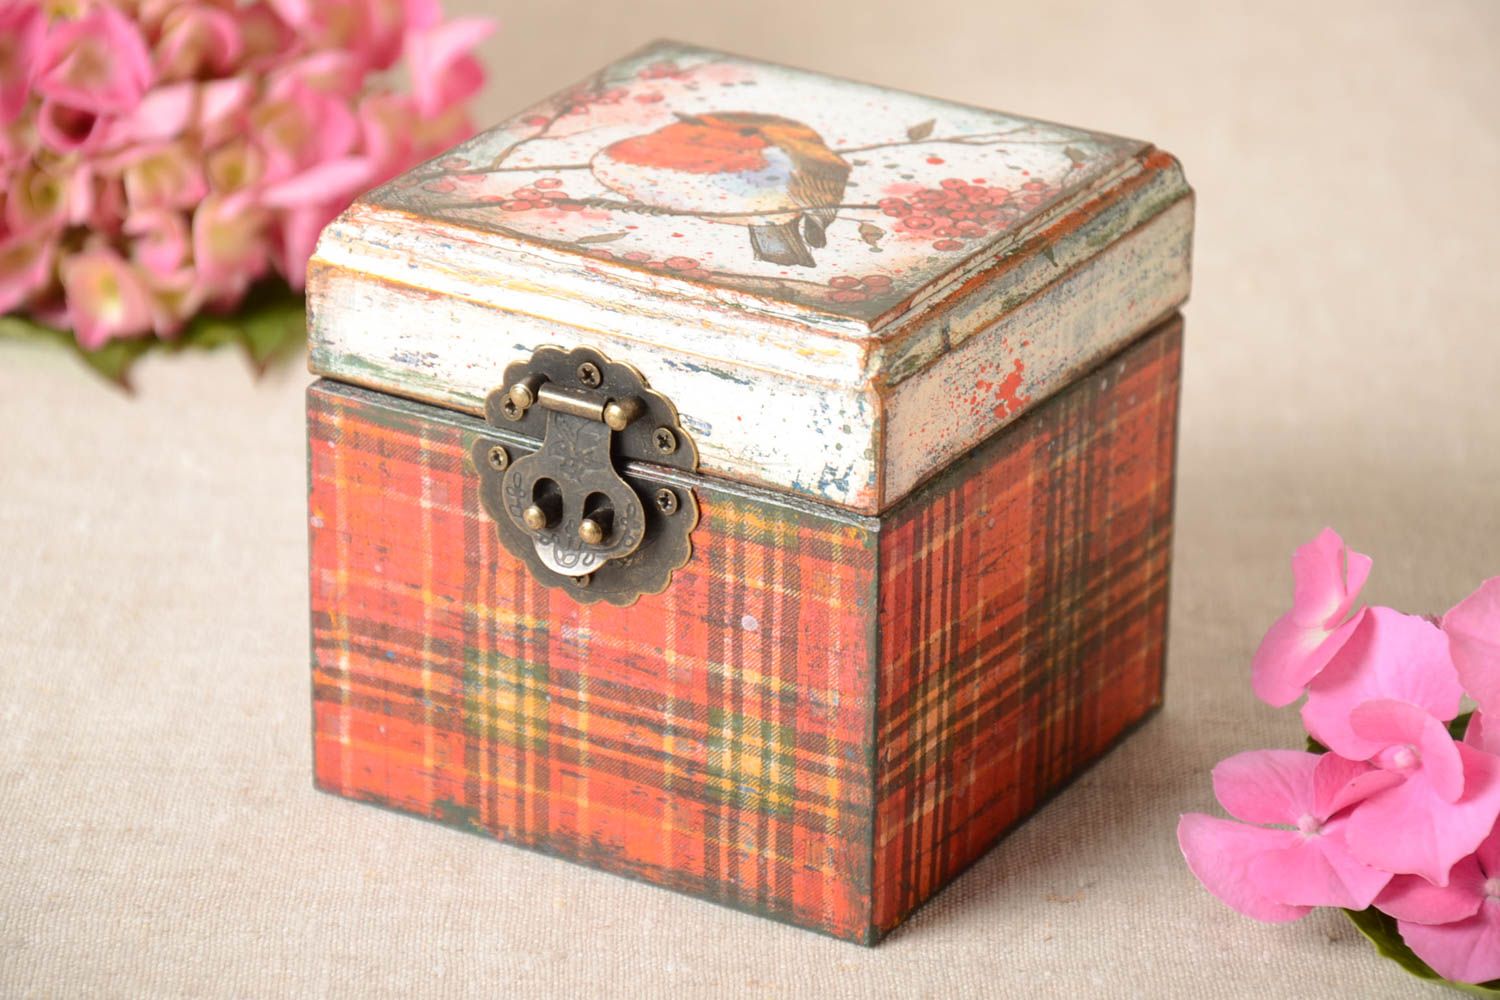 Handmade wooden jewelry box jewelry storage jewelry boxes for women cool gifts photo 1